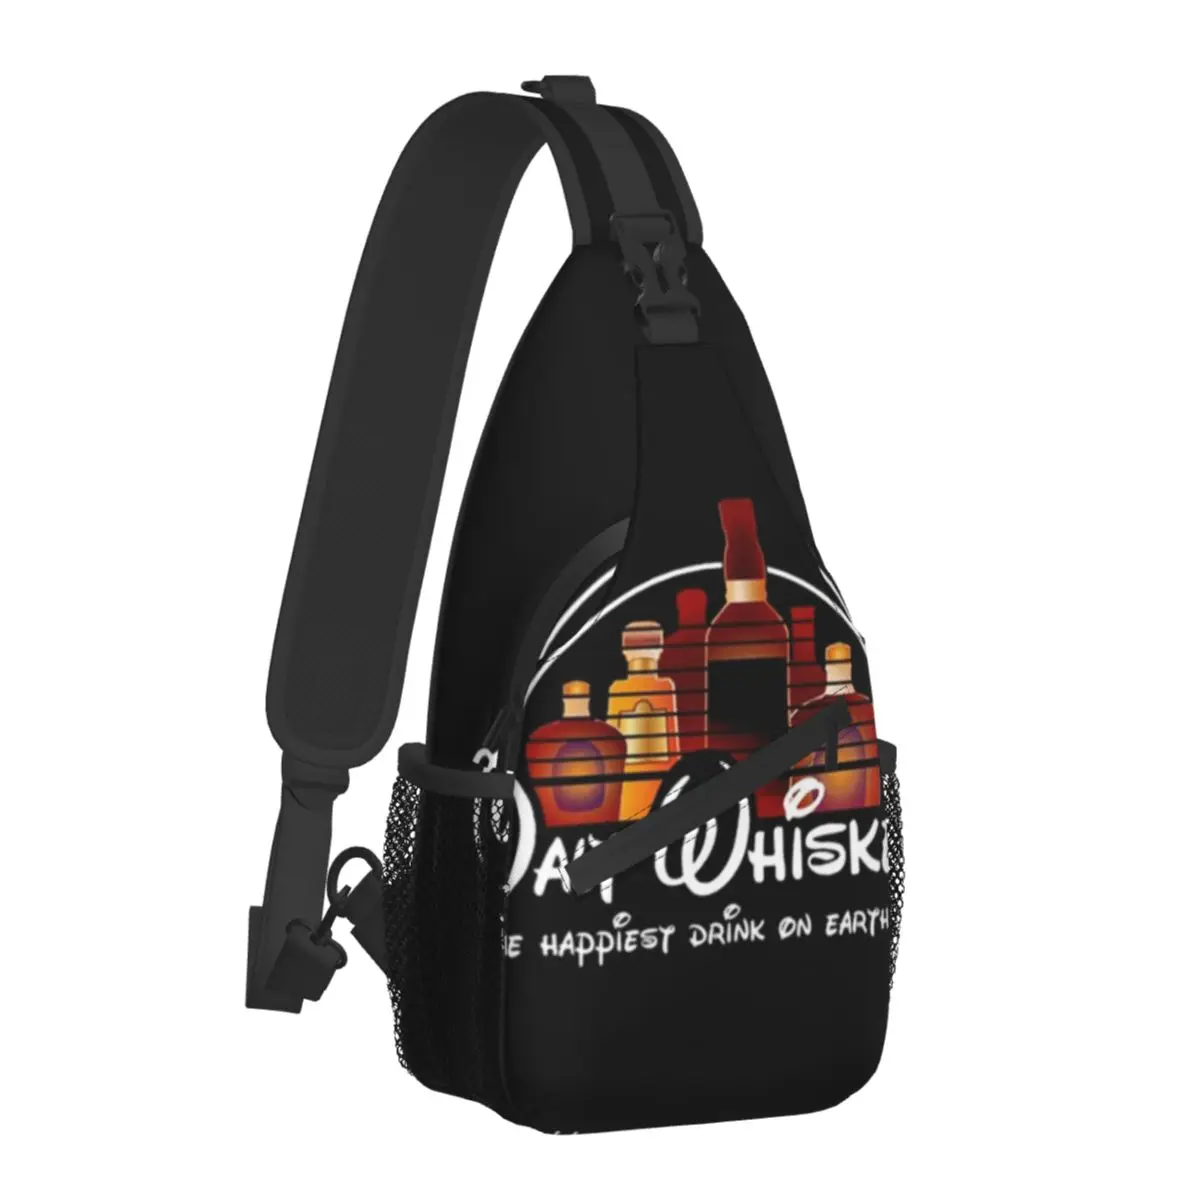 

Malt Whiskey Beer Shoulder Bags scotland drink Novelty Chest Bag Women Bicycle Running Sling Bag School Graphic Small Bags